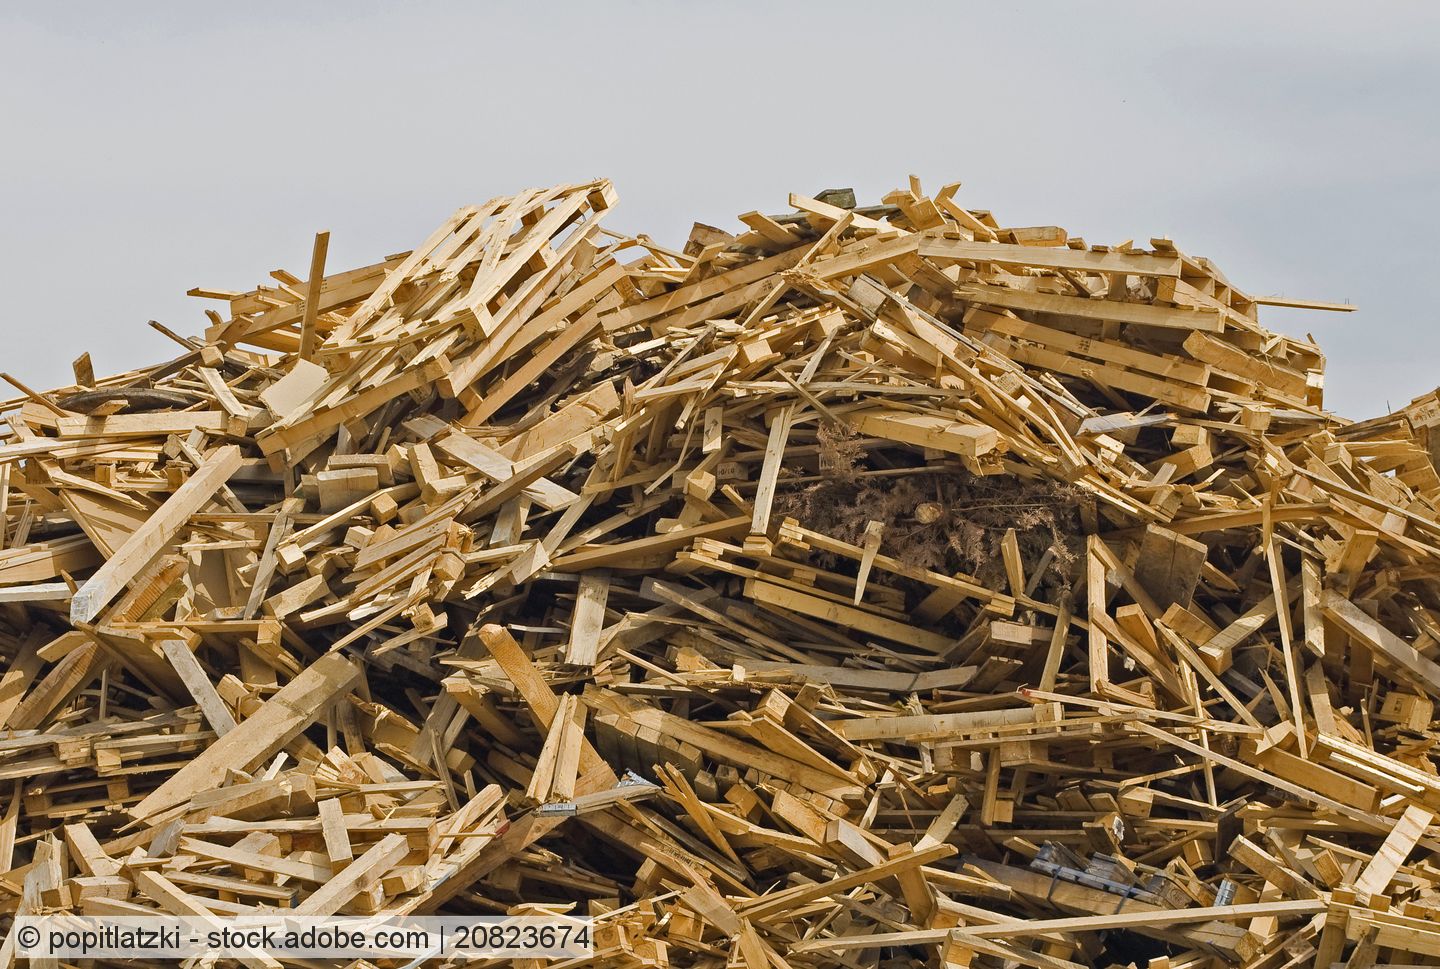 Waste wood prices still largely stable in Germany